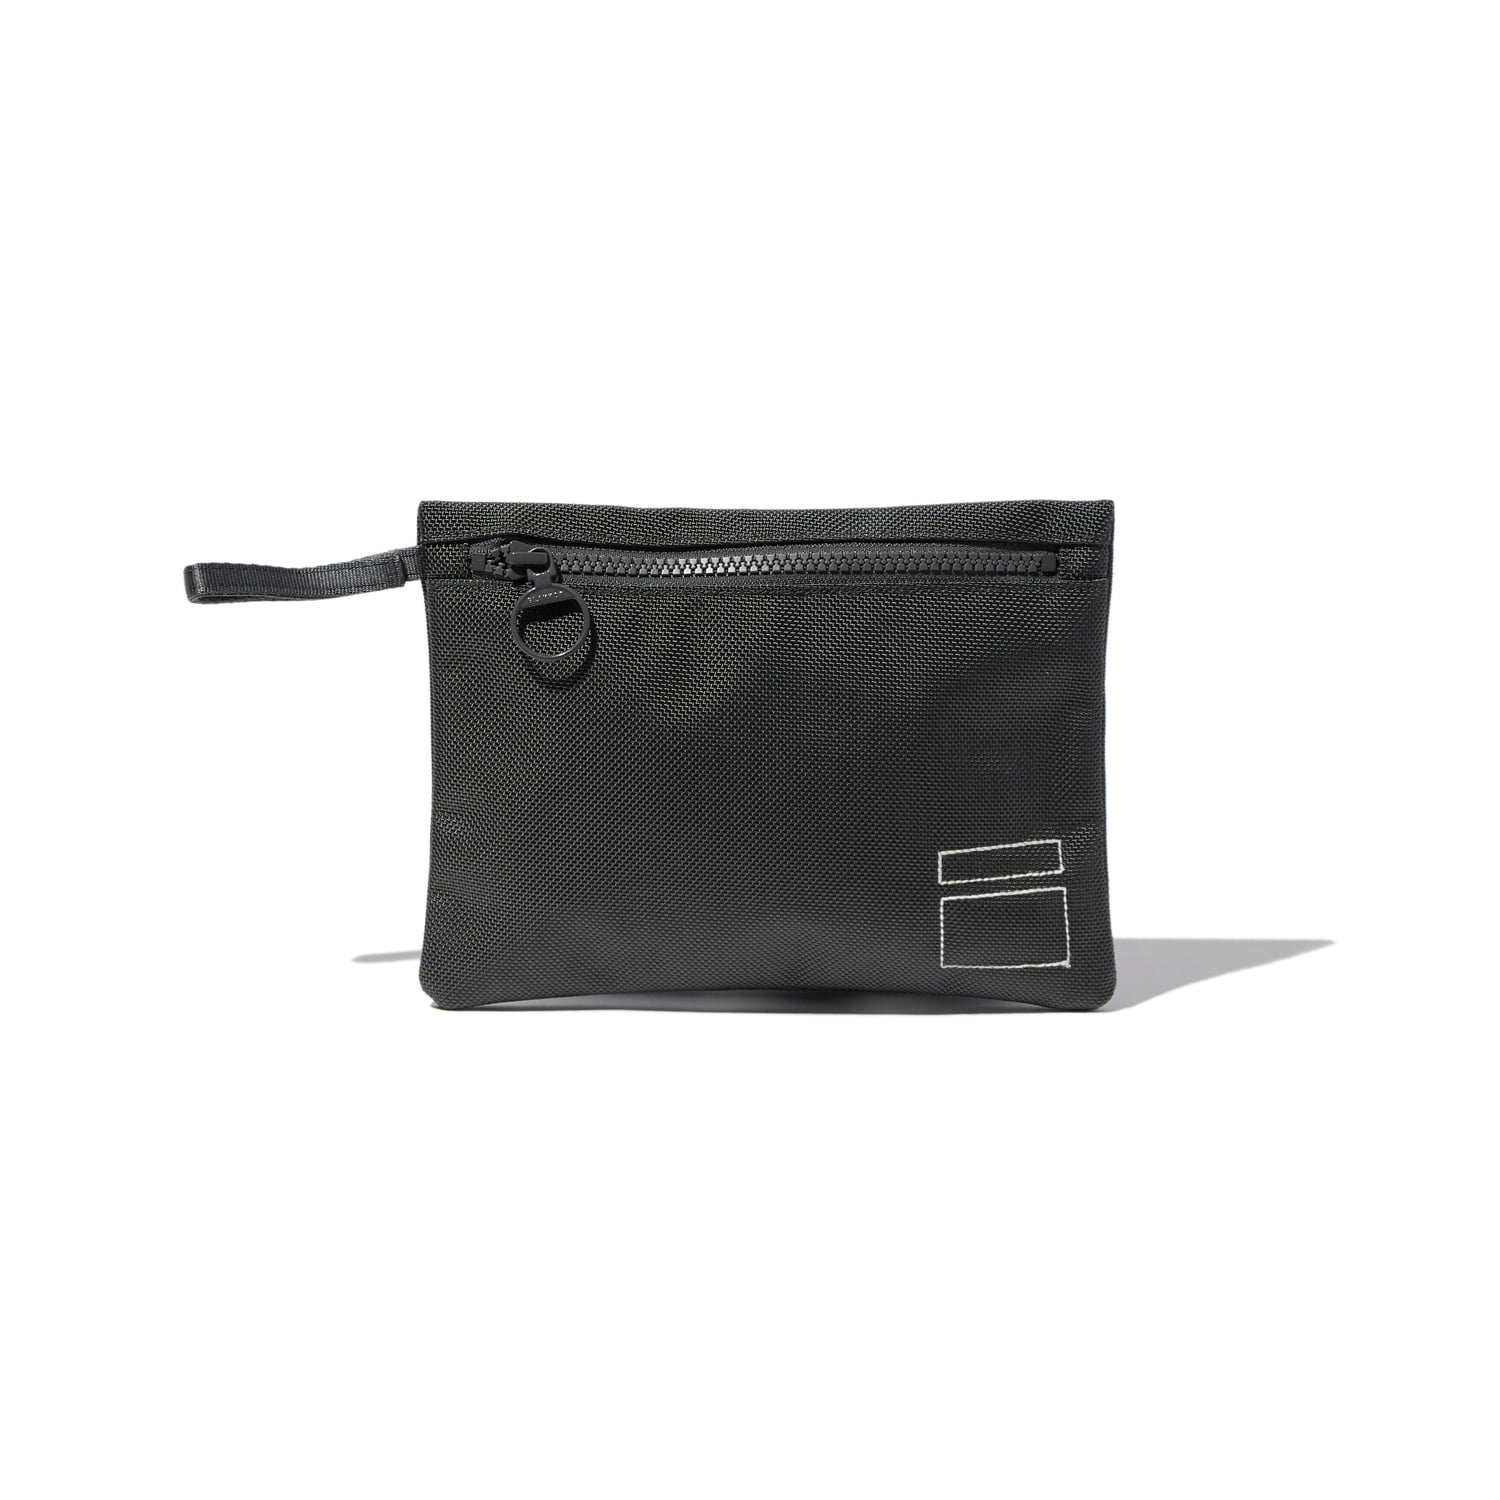 PST 01 10IN DEPOSIT POUCH (OLIVE GREY)